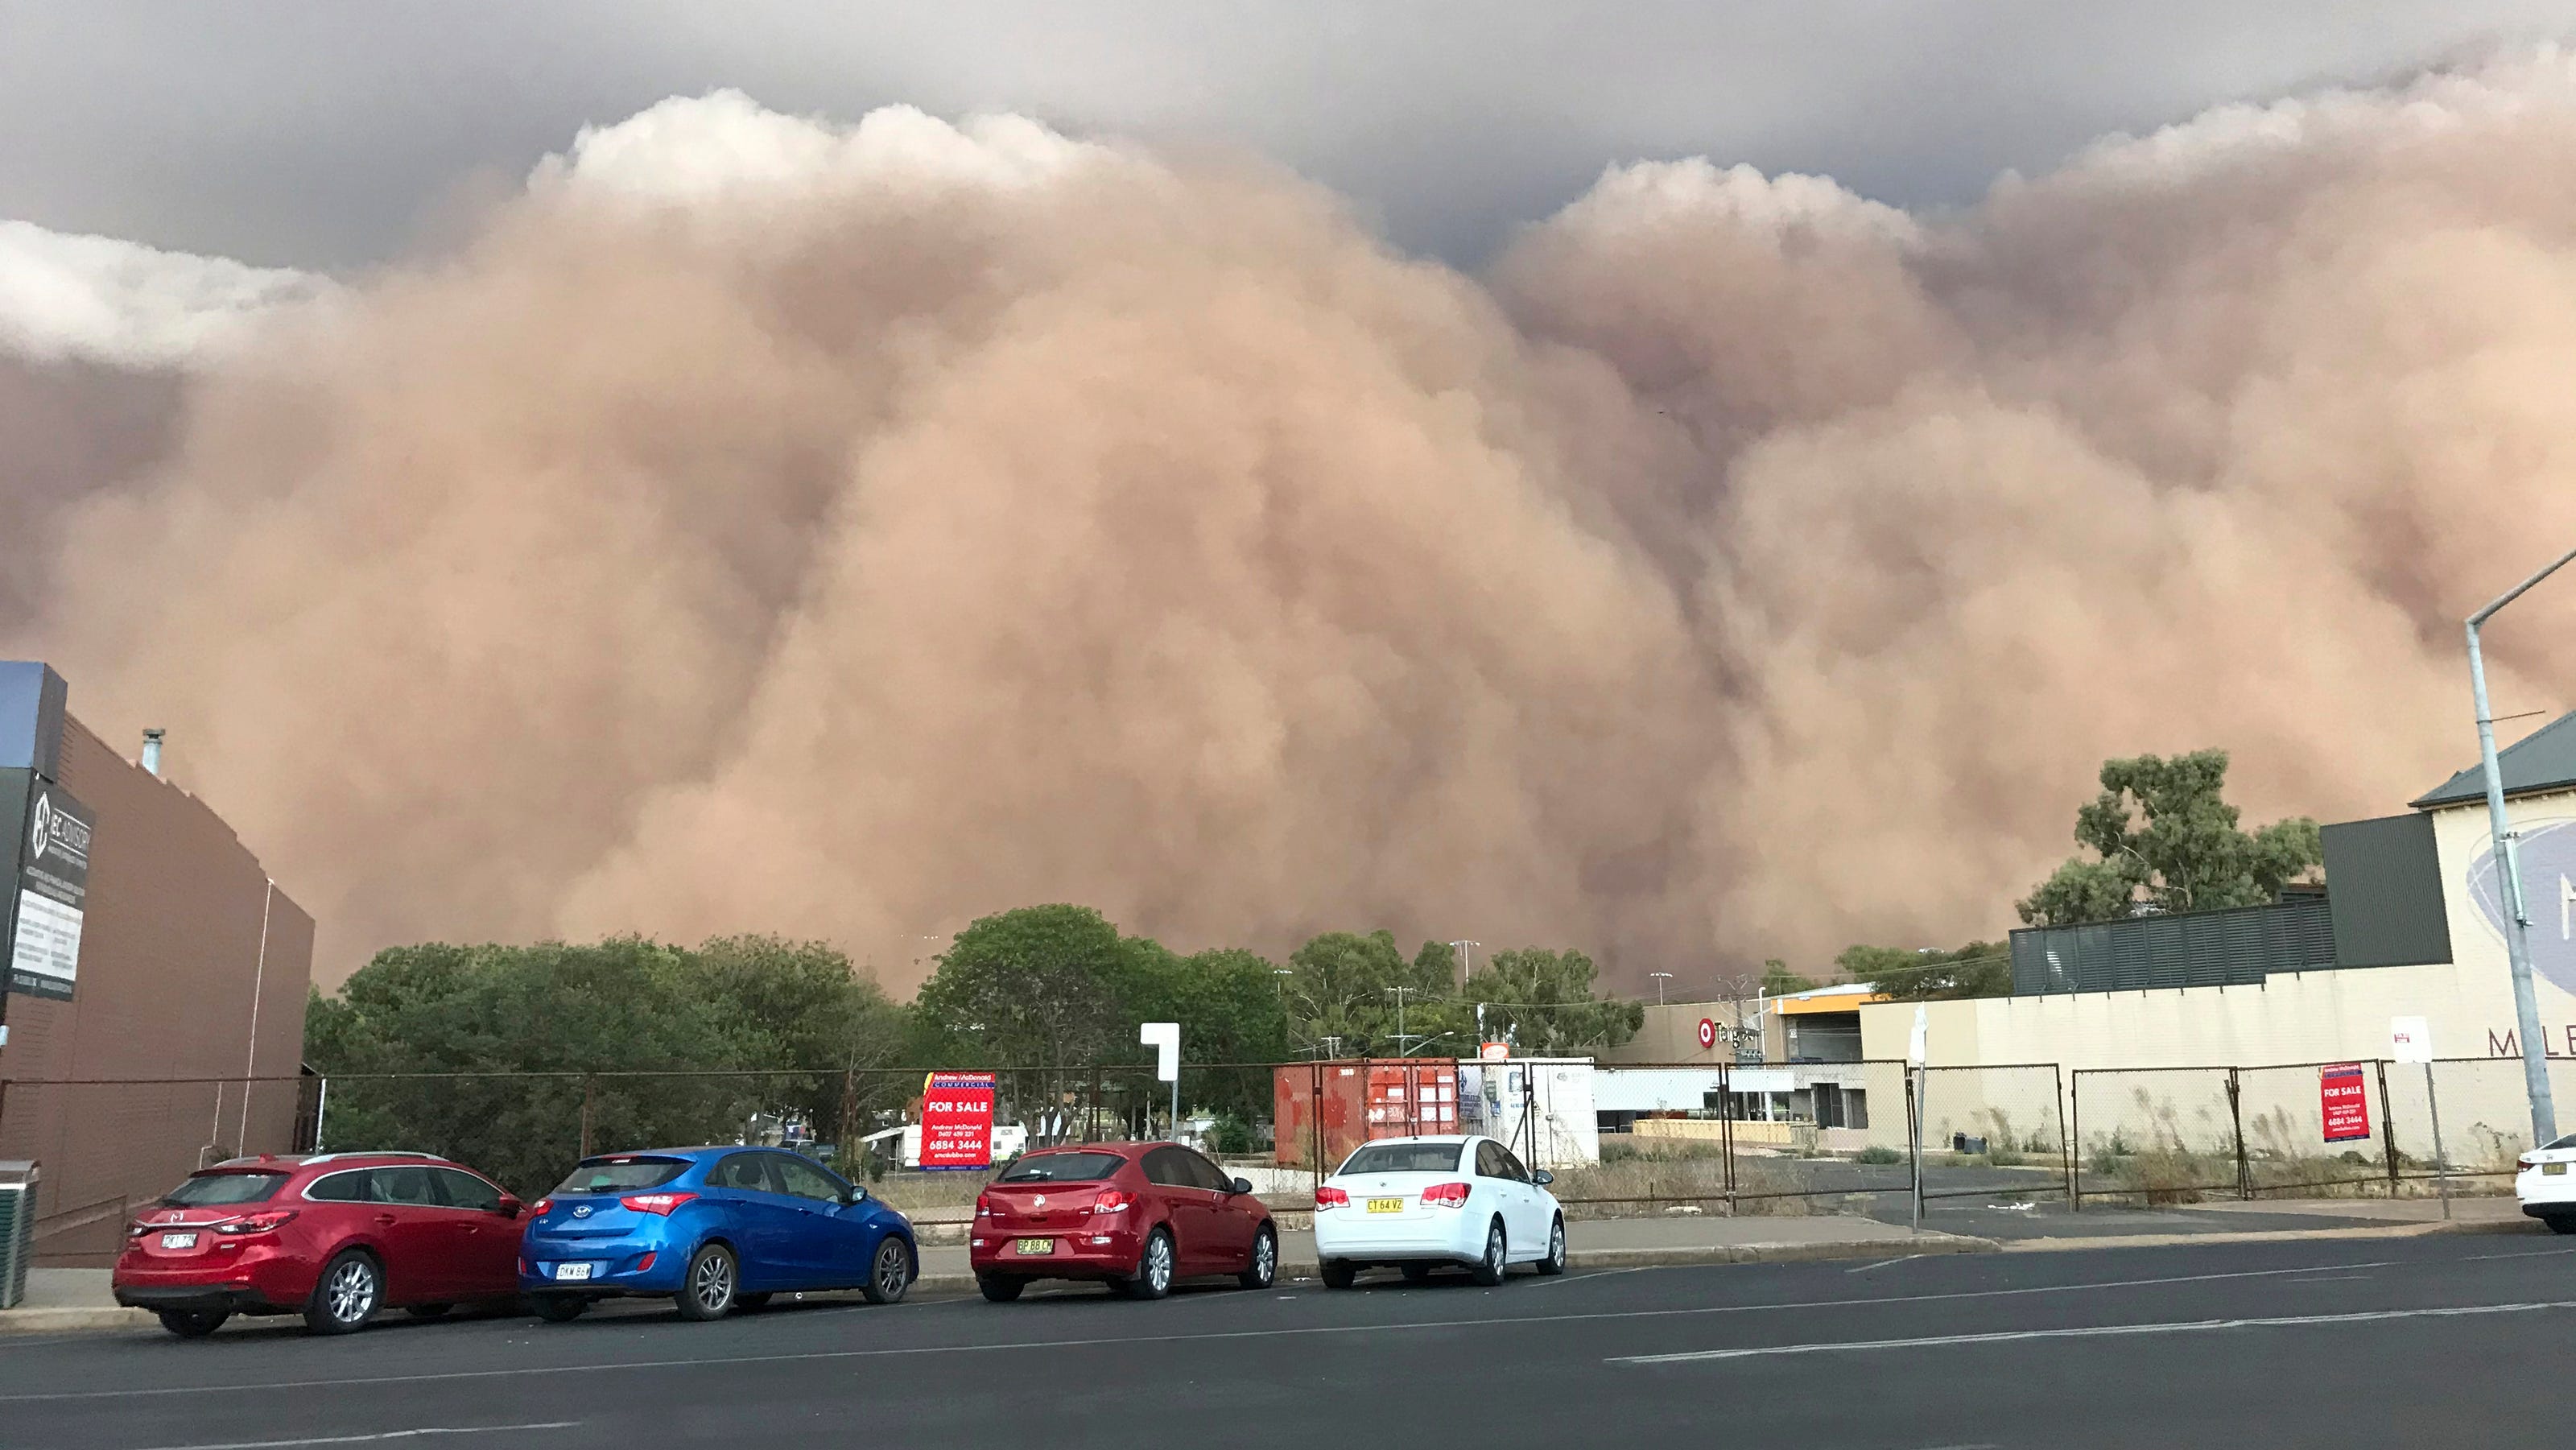 Dust storms, hail and flash floods batter Australian cities amid raging wildfires - USA TODAY